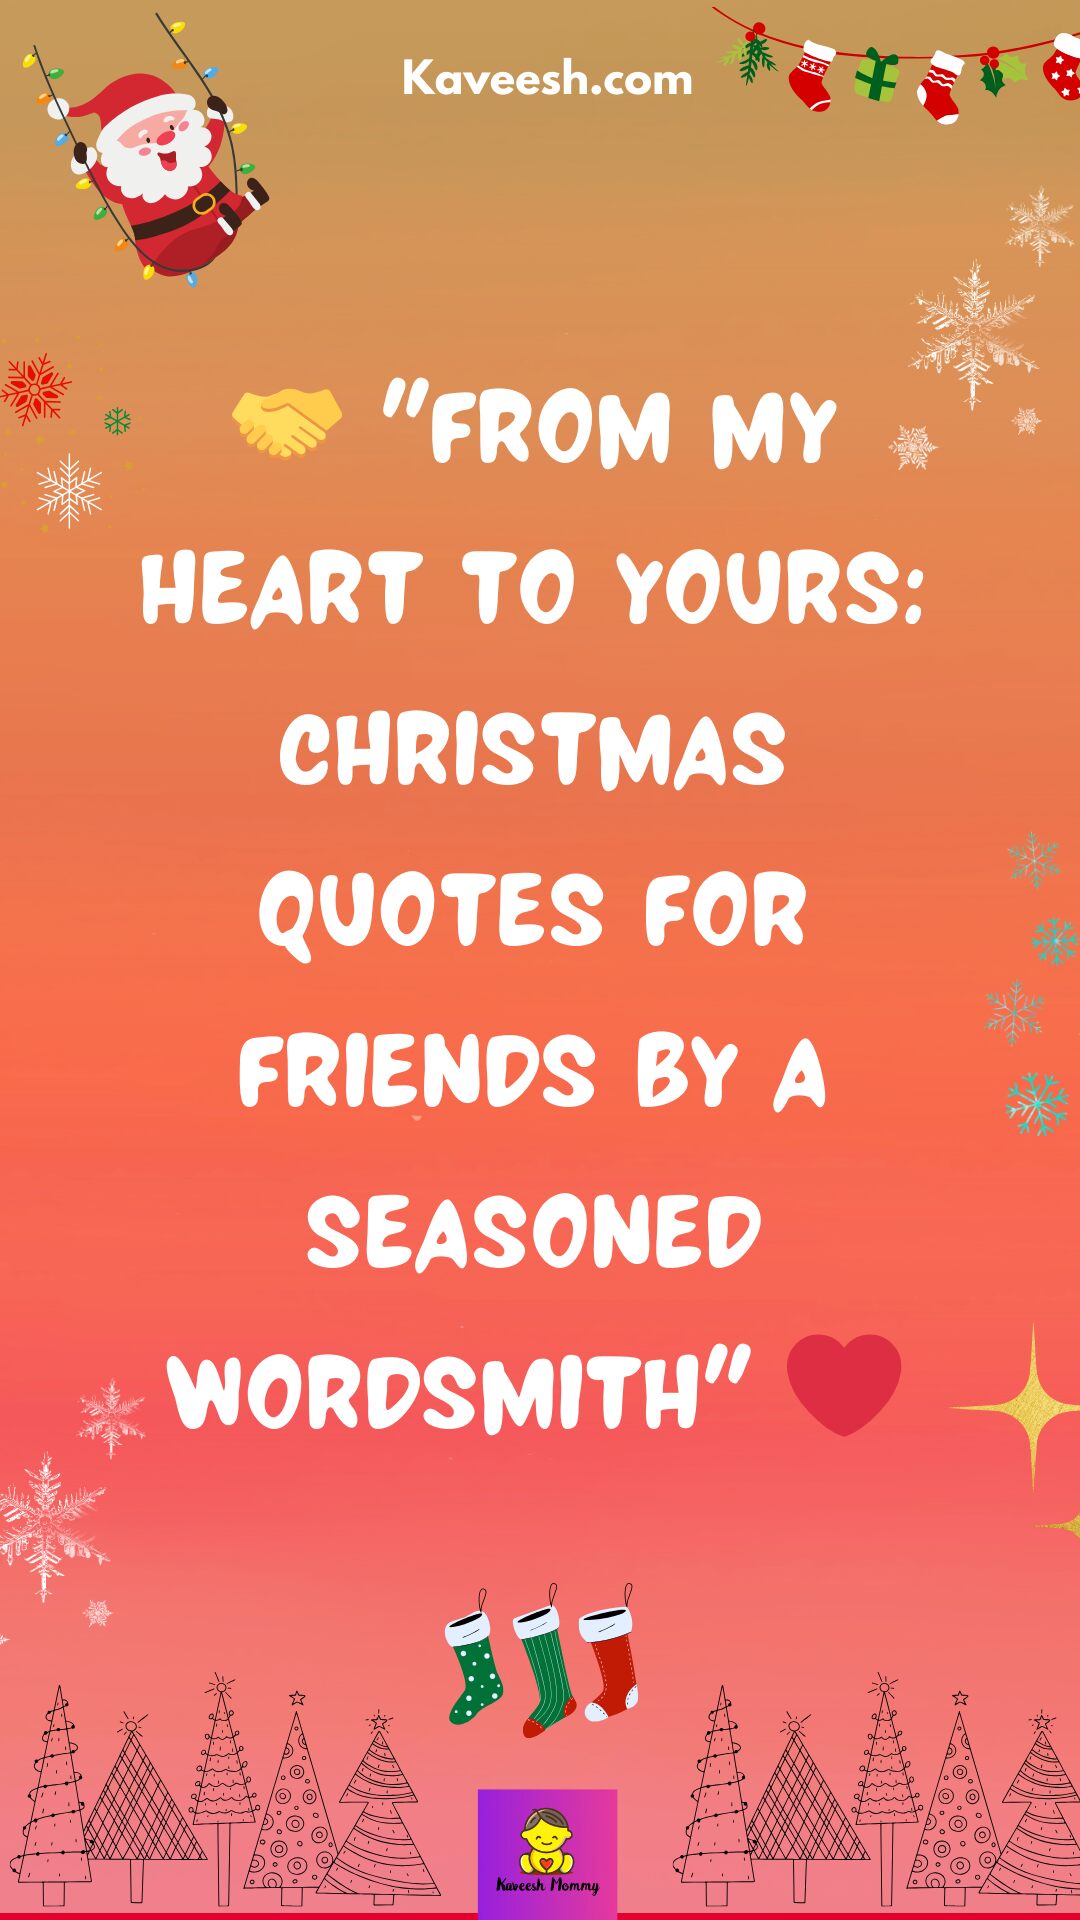 List of Merry Christmas quotes for friends